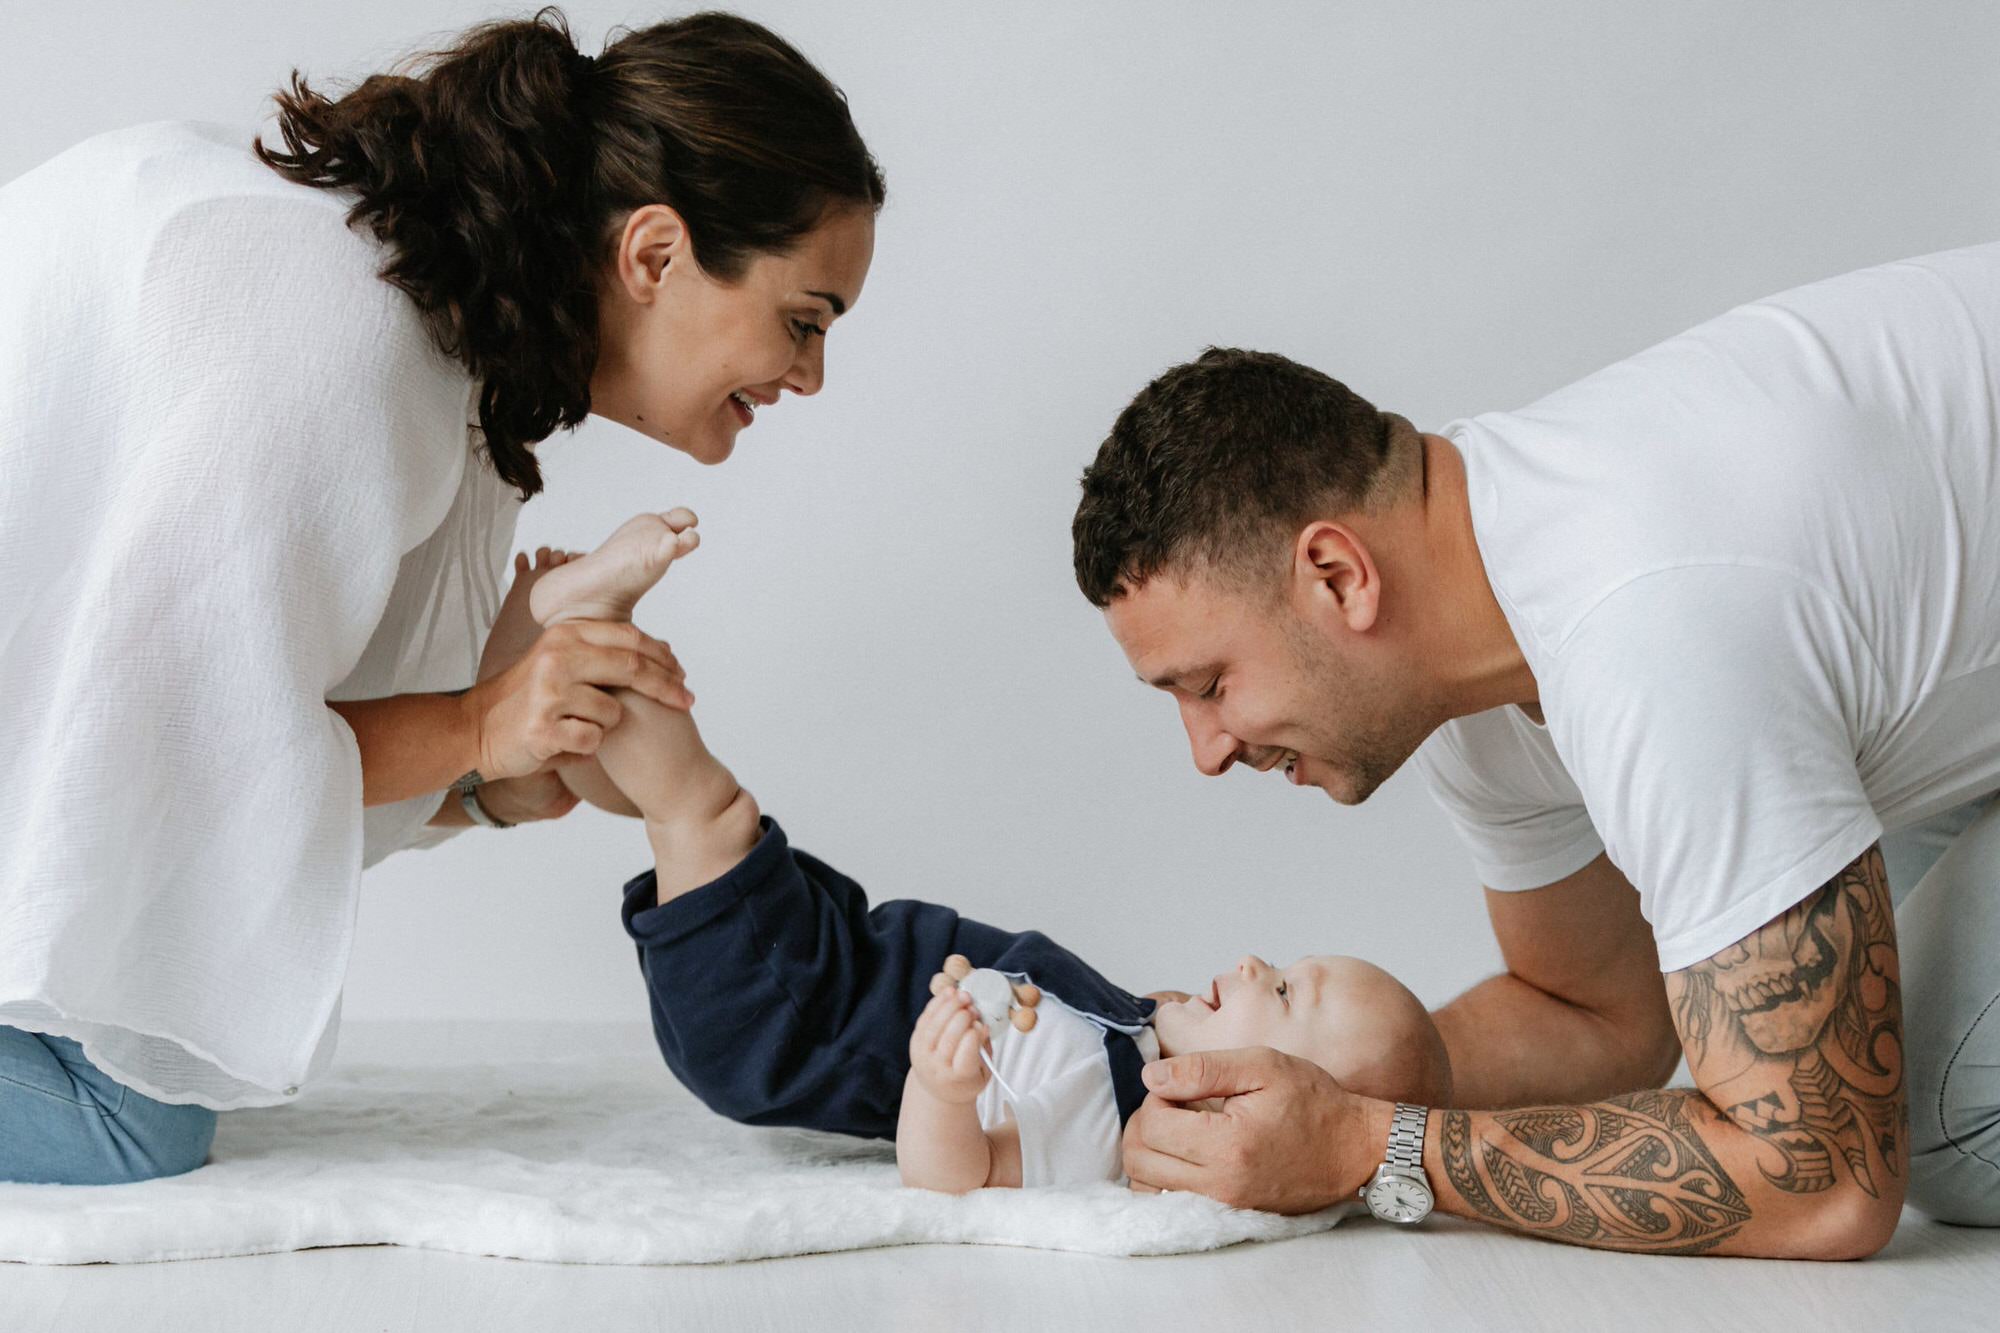 mummy and daddy playing with their baby boy laughing at his Kent baby photoshoot in Bexley